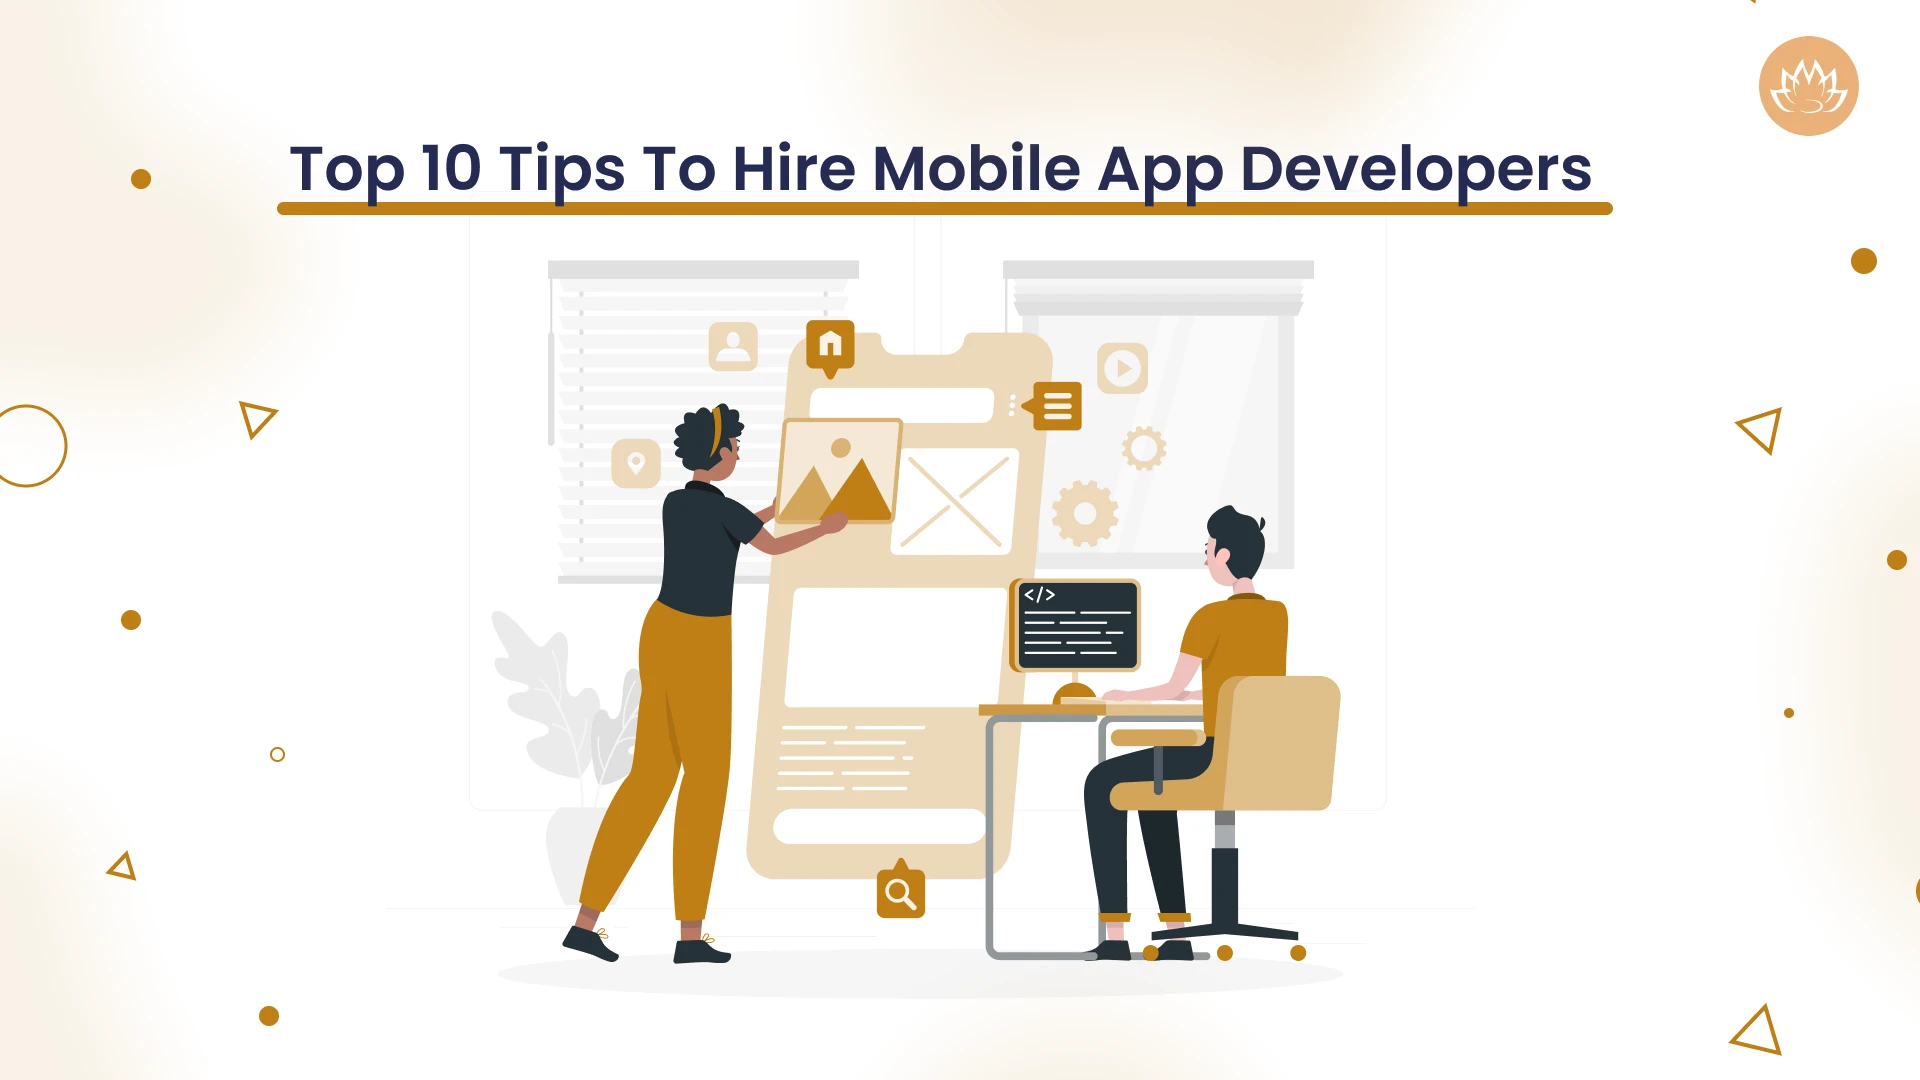 Tips To Hire Mobile App Developers